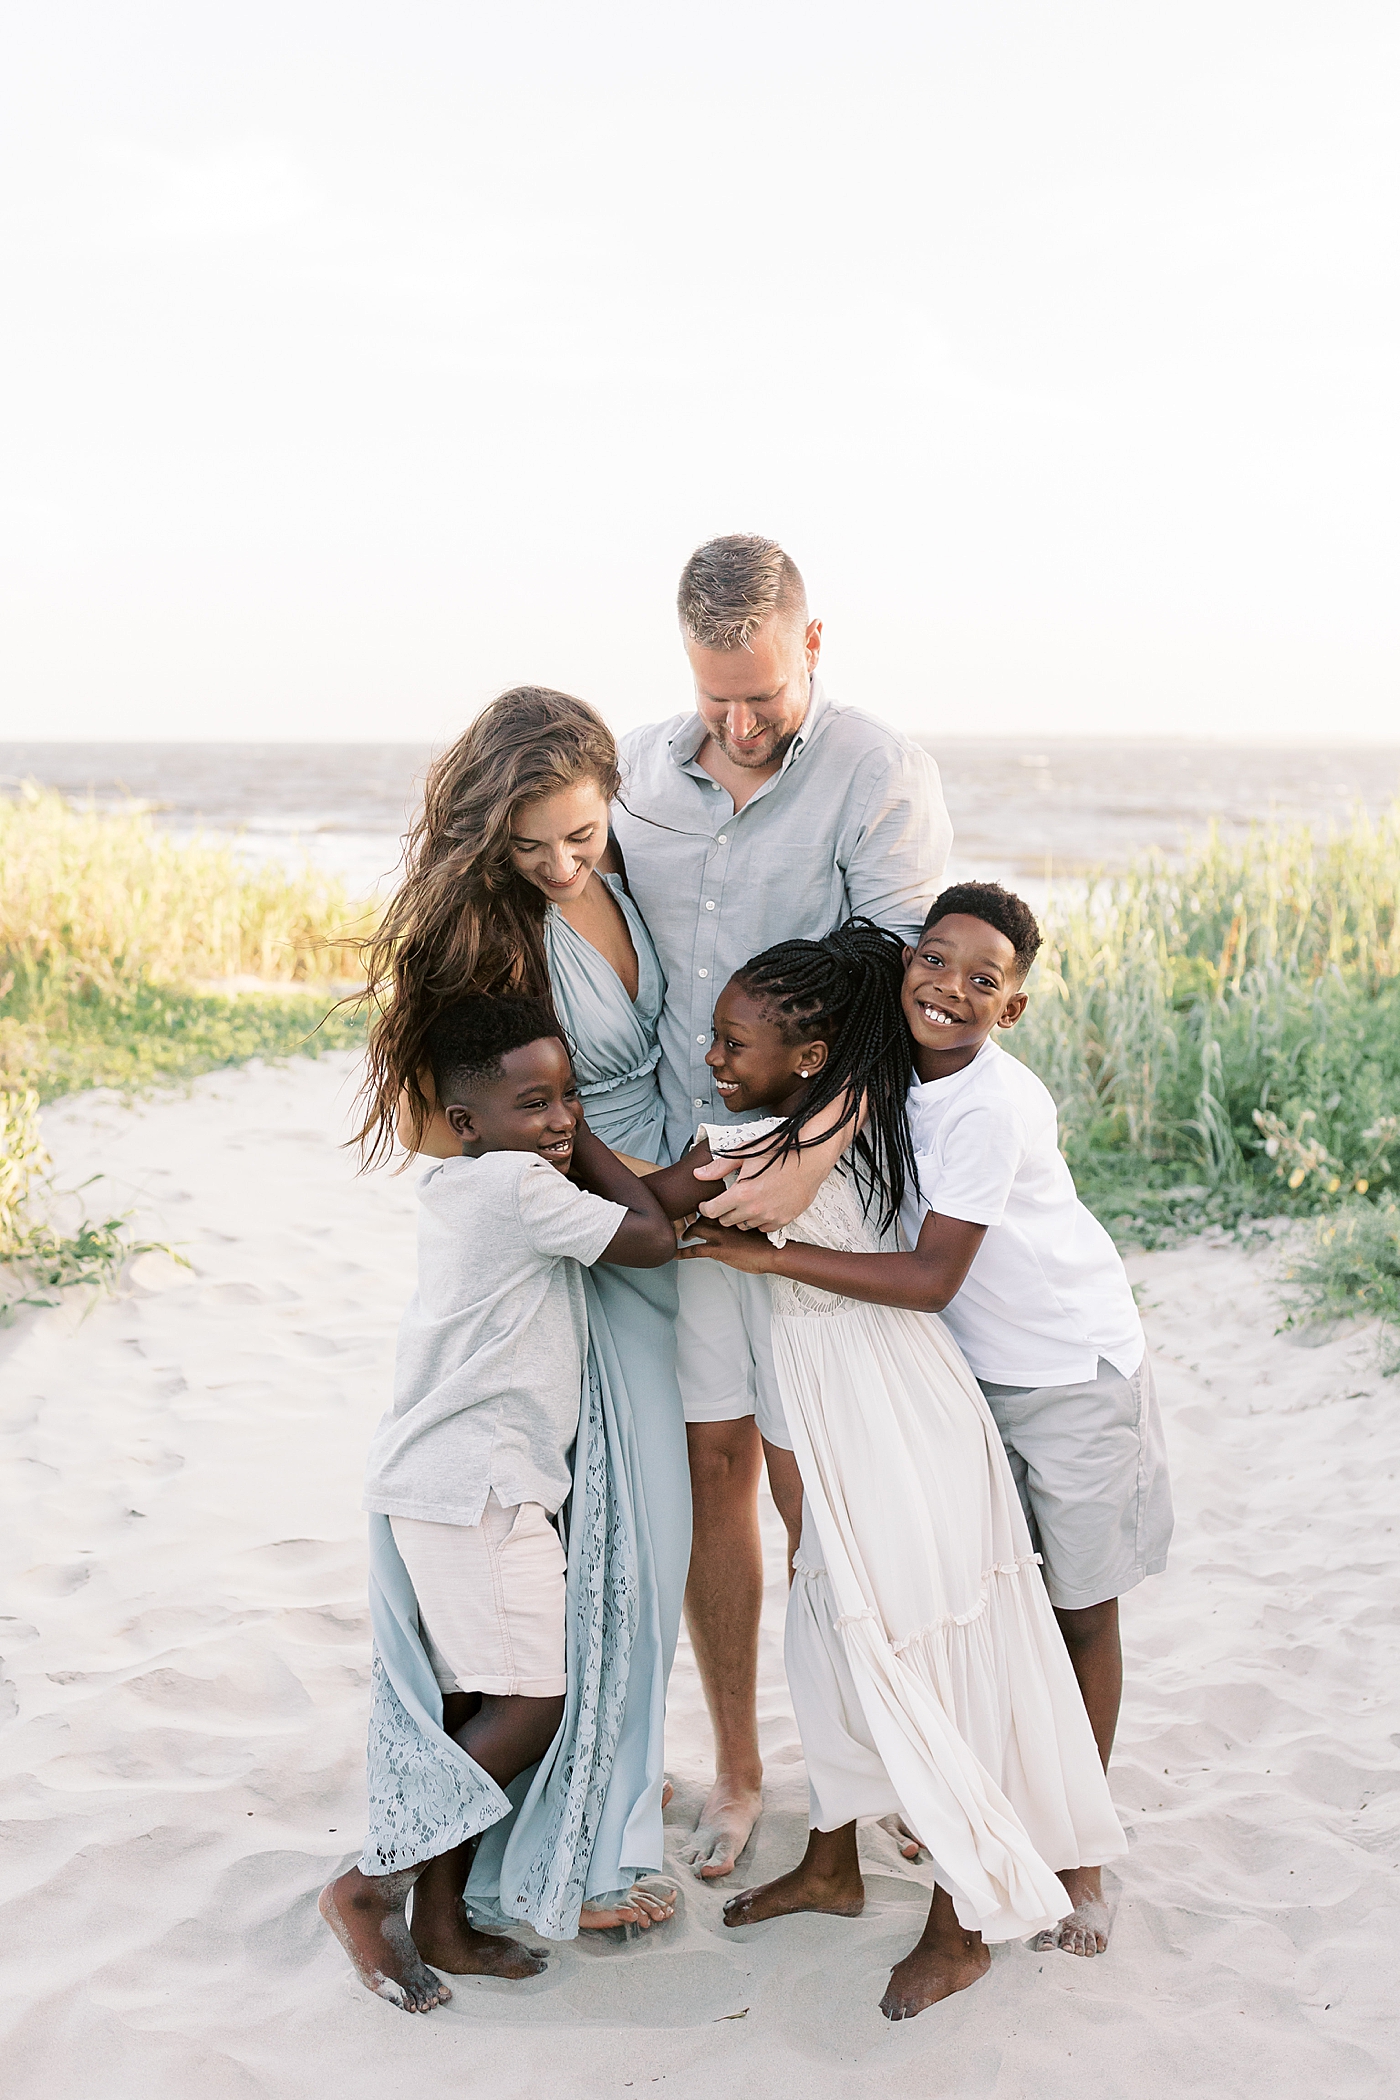 Family snuggling during beach family photos in Charleston | Image by Caitlyn Motycka